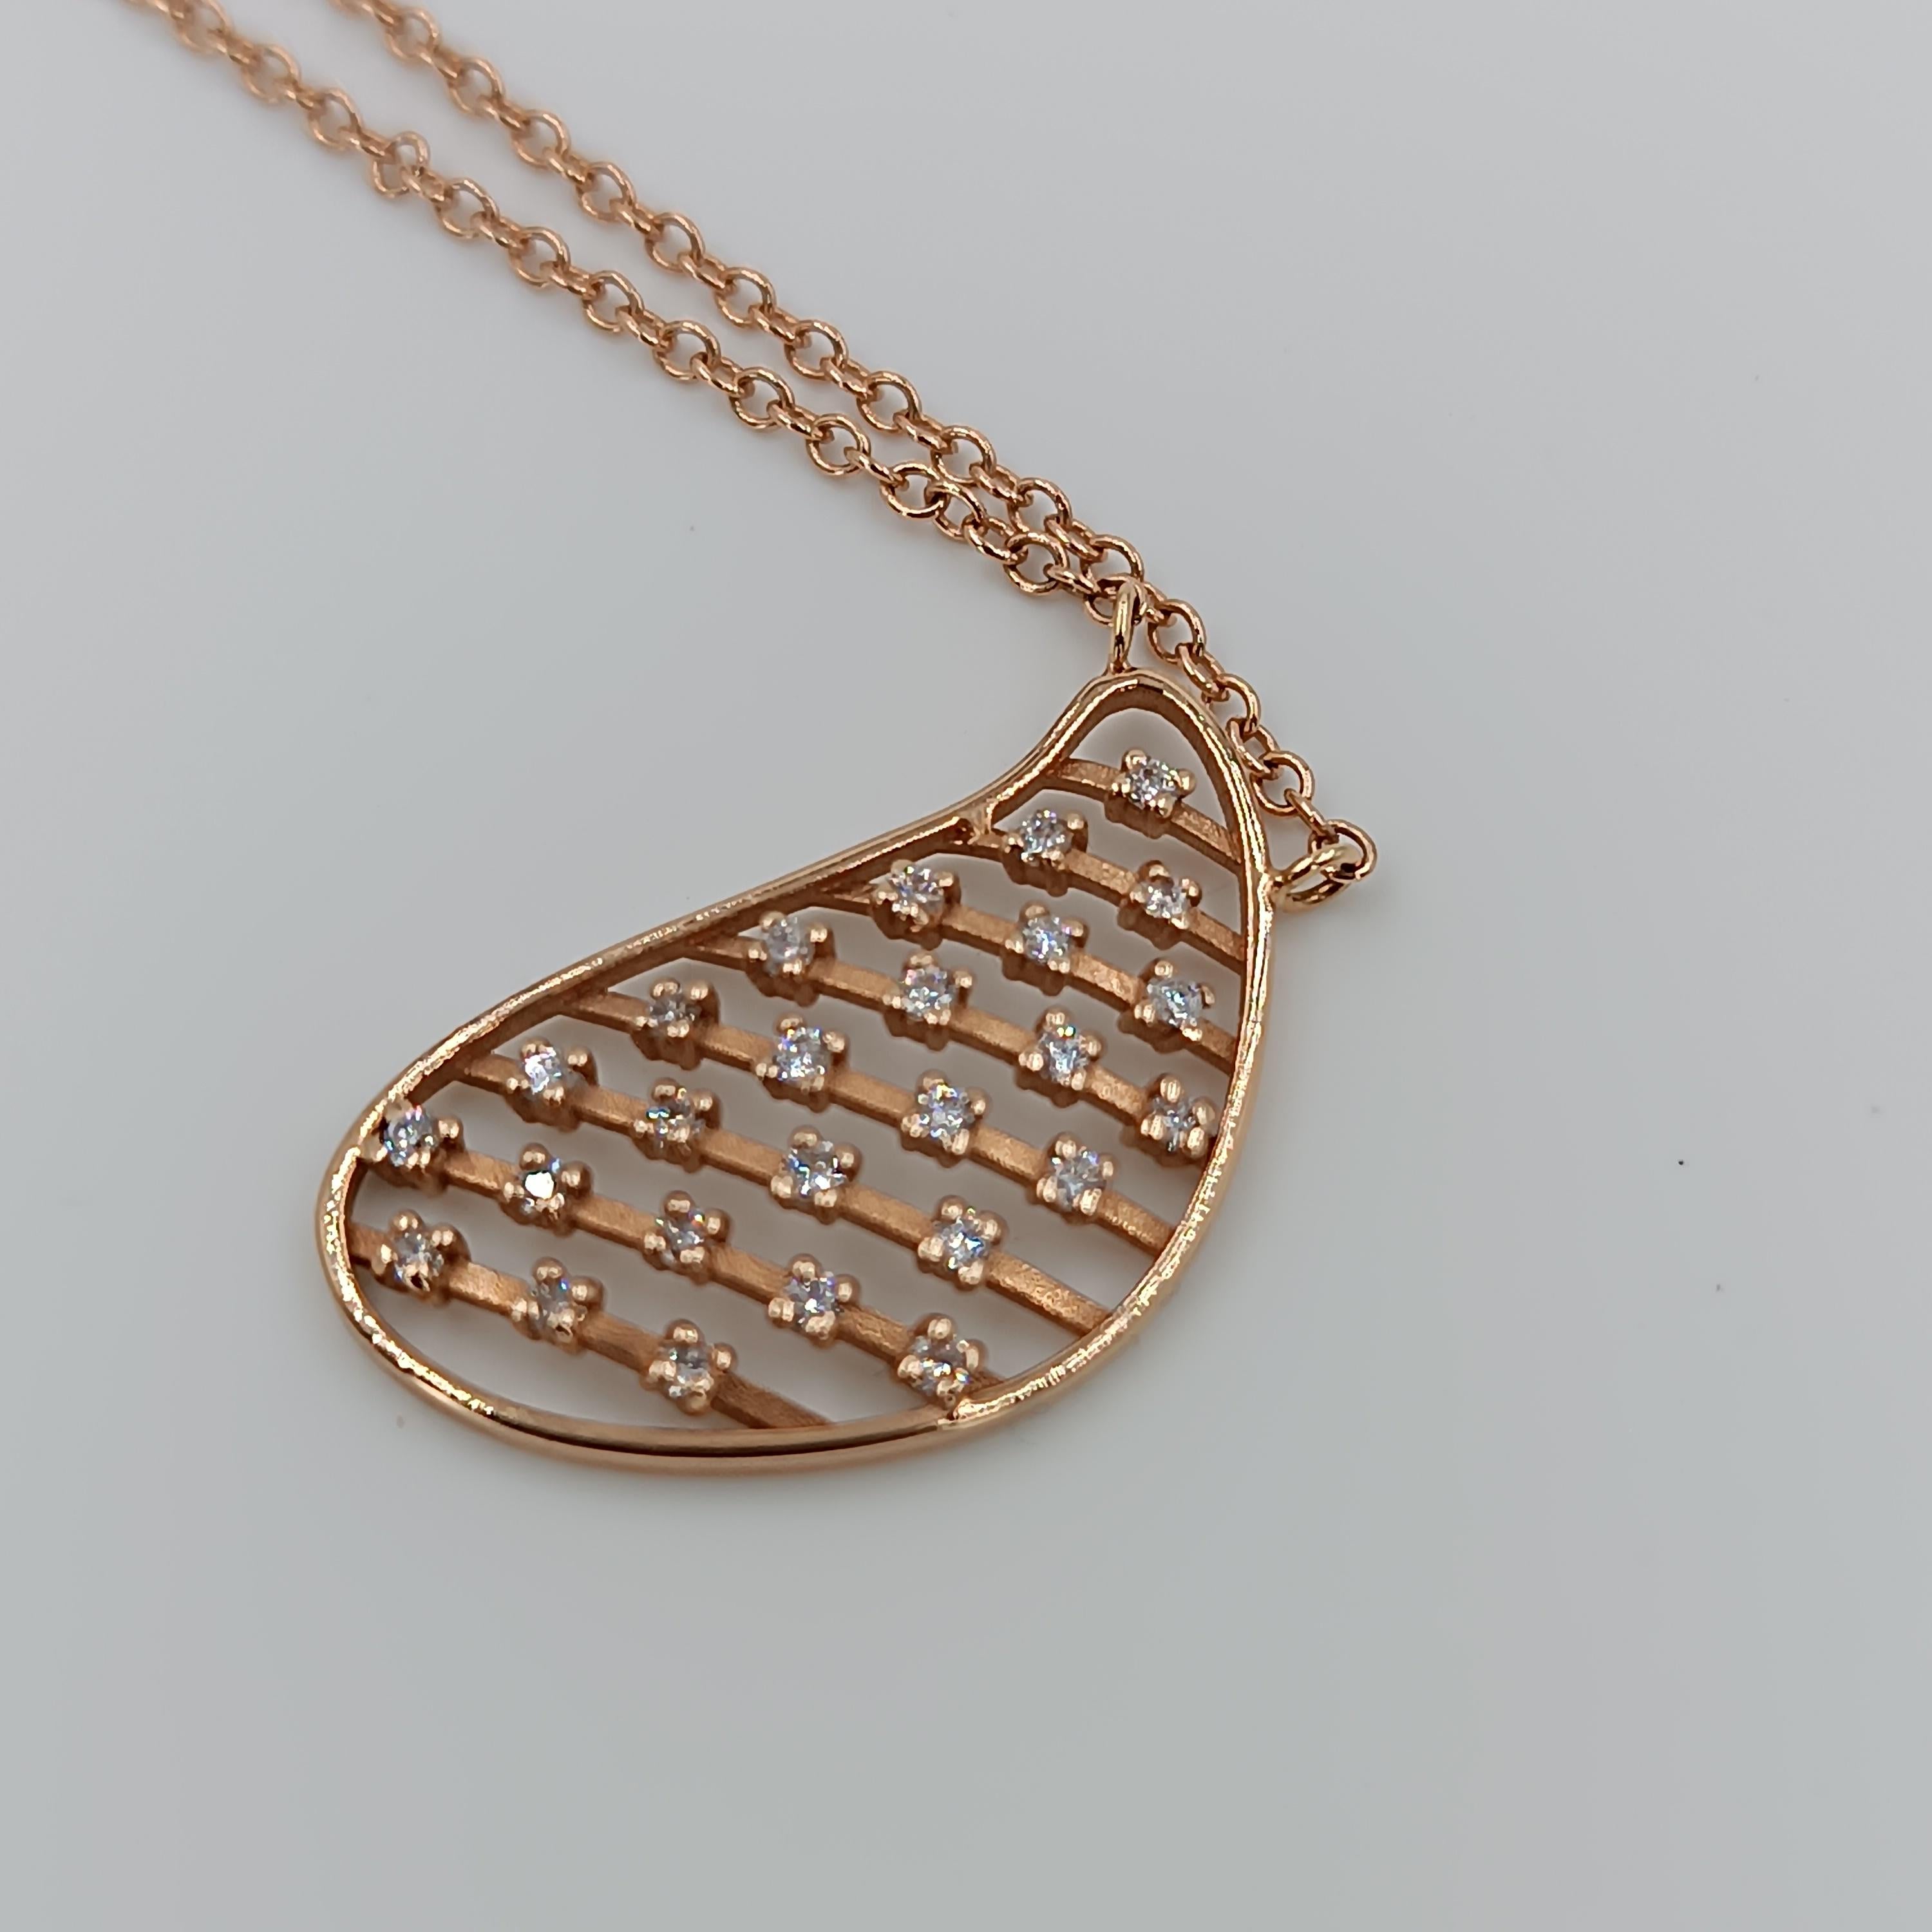 This wonderful Leo Milano necklacefrom our Palestro  collection shows in every detail a very complicate yet perfectly done workmanship. The necklace is in 18 carat Rose gold .The necklace weight 4.26 grams,the lenght is 42 centimeters the total